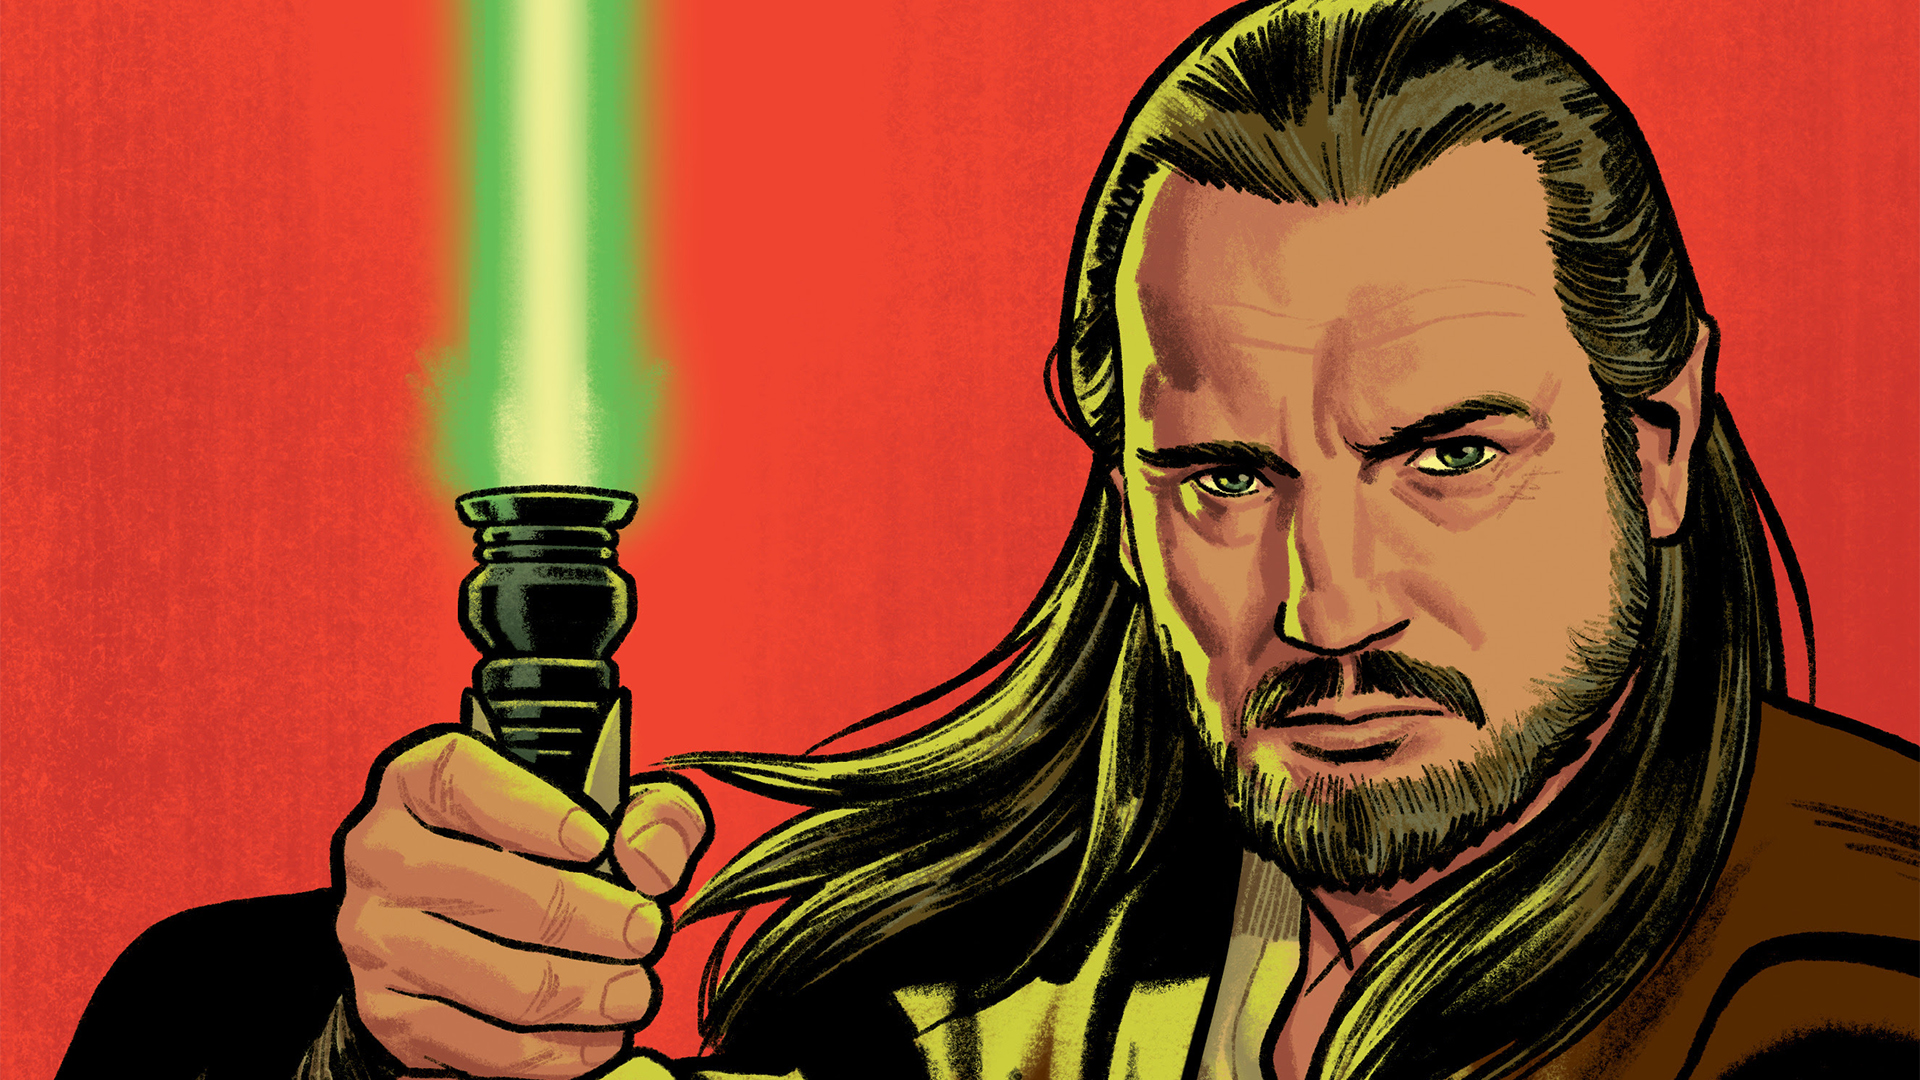 Someone want to tell me why this Qui-Gon Jinn lightsaber is red? :  r/StarWars